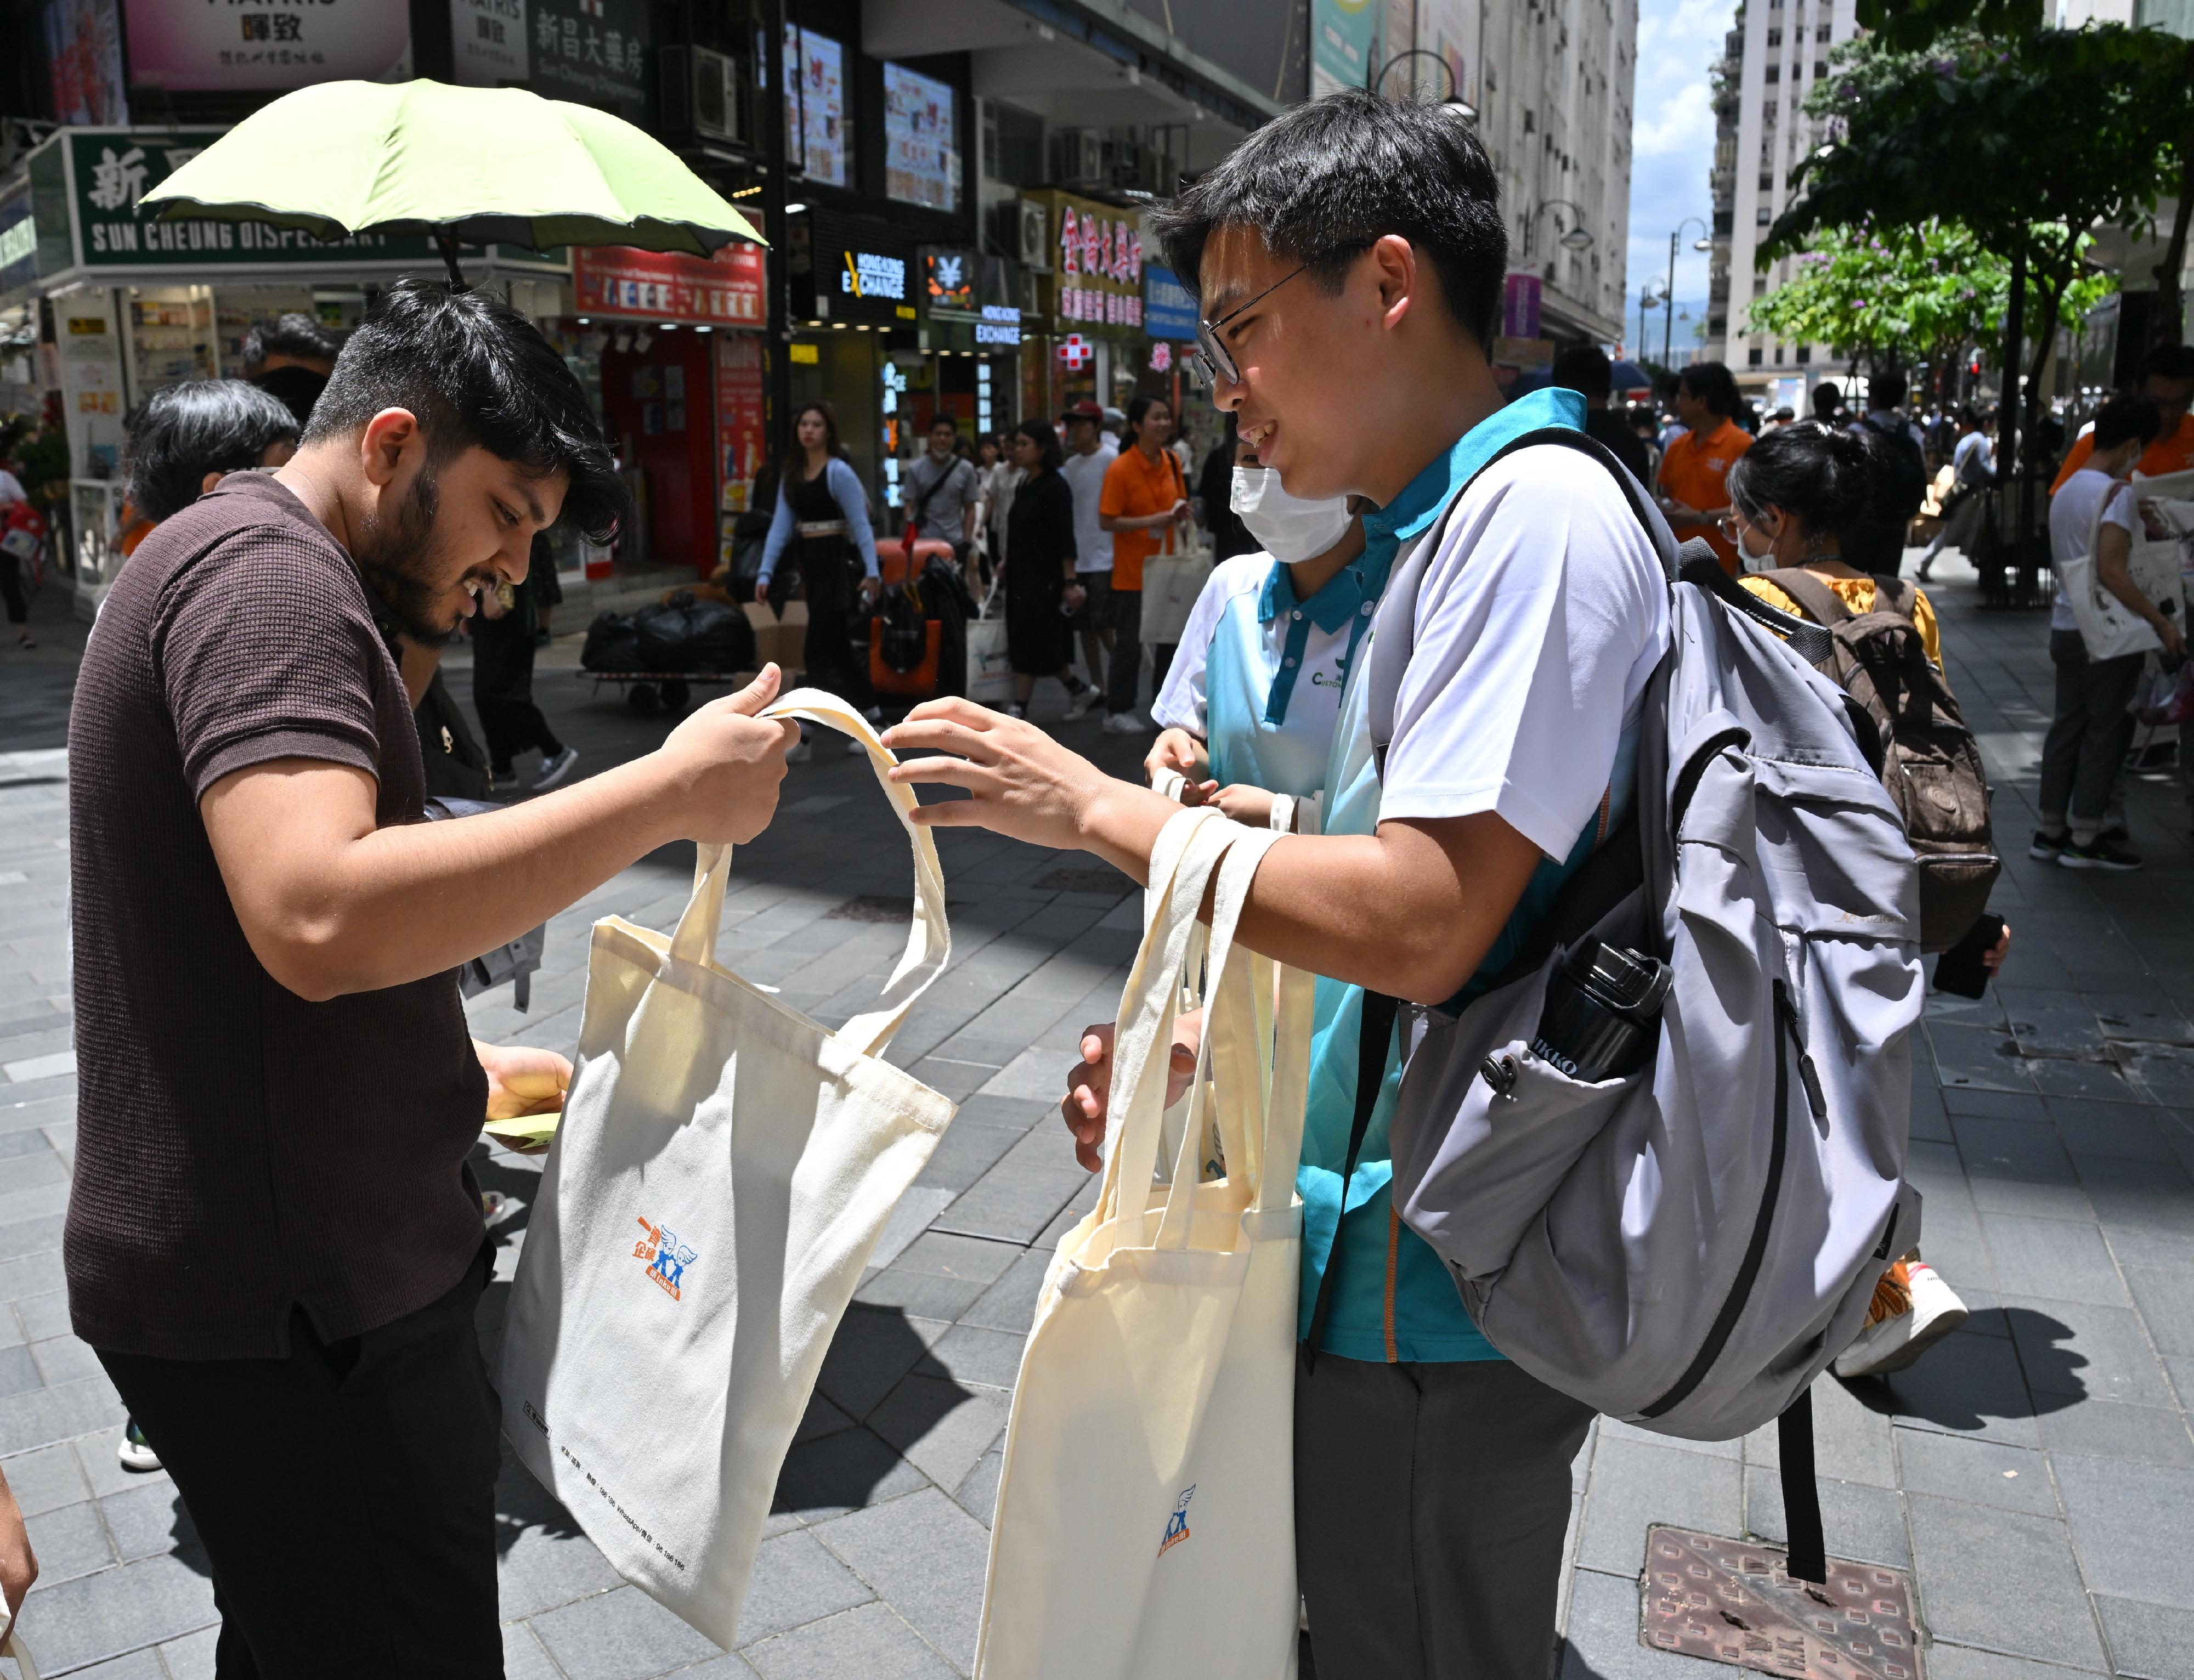 To echo the International Day against Drug Abuse and Illicit Trafficking, the Action Committee Against Narcotics held a preventive education and publicity event today (June 26) to unite different sectors of the community in the fight against drugs. Photo shows a youth member of "Customs YES" (right) distributing anti-drug leaflets and publicity items to members of the public, reminding them to firmly say no to drugs. 